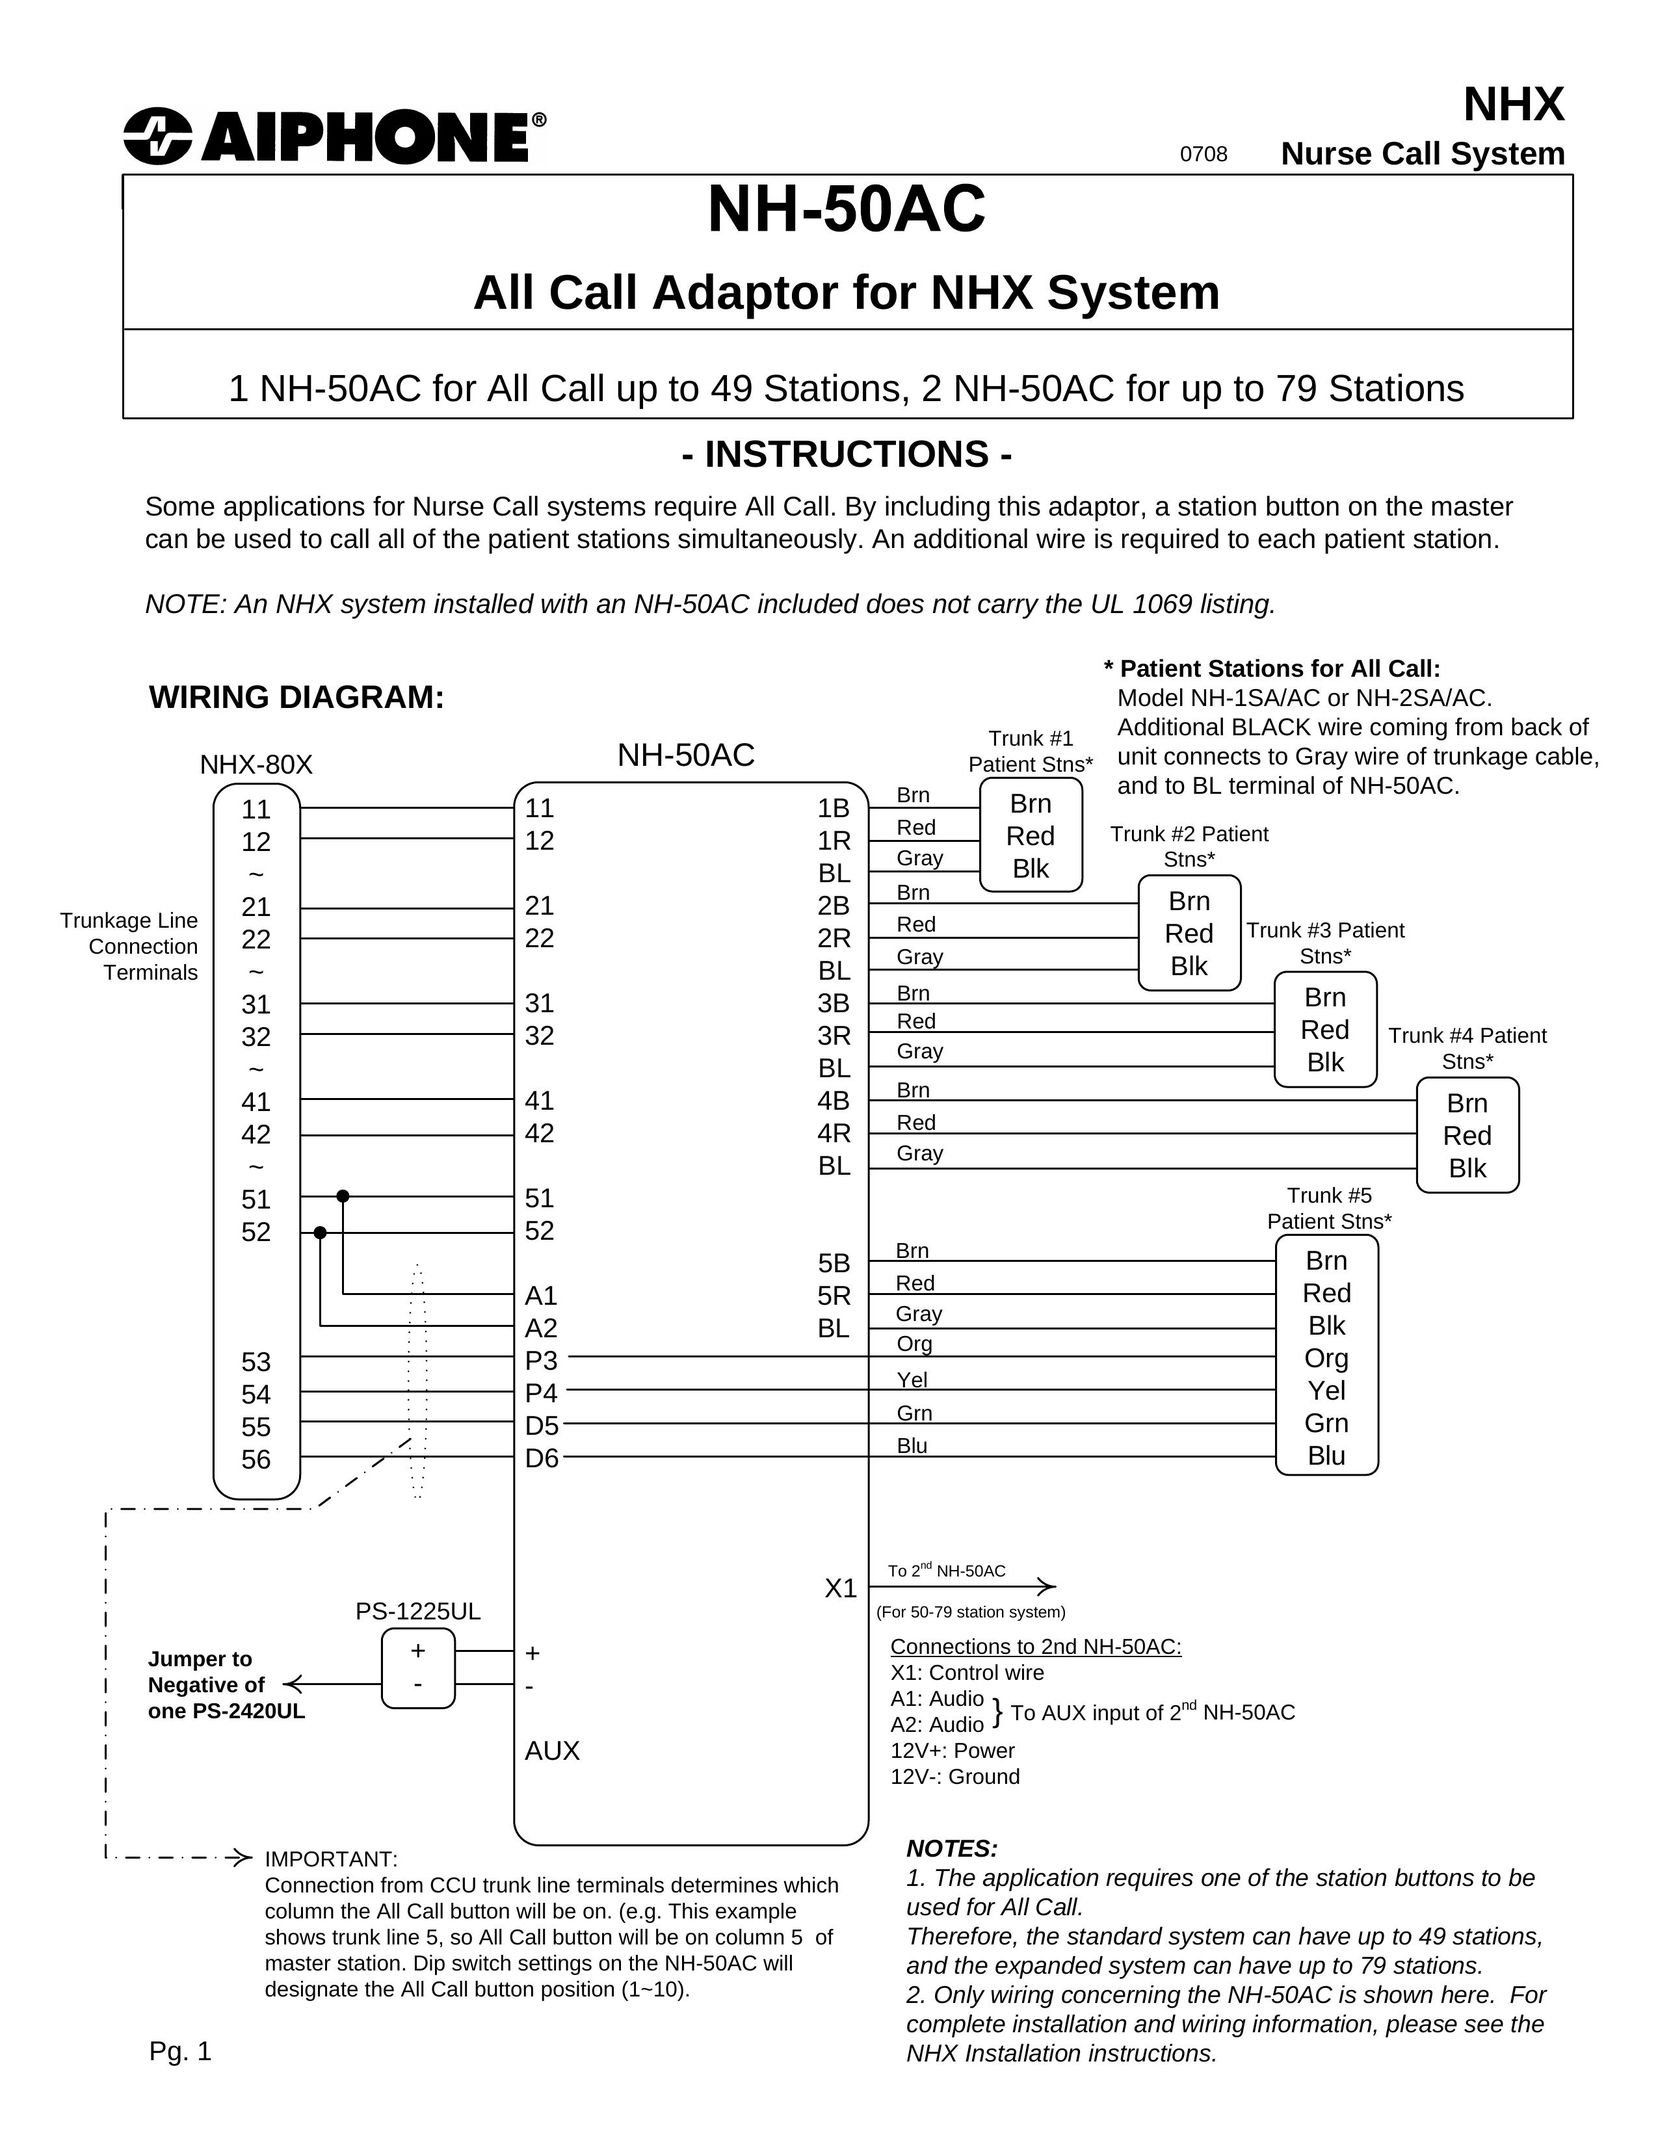 Aiphone NH-50AC Video Gaming Accessories User Manual